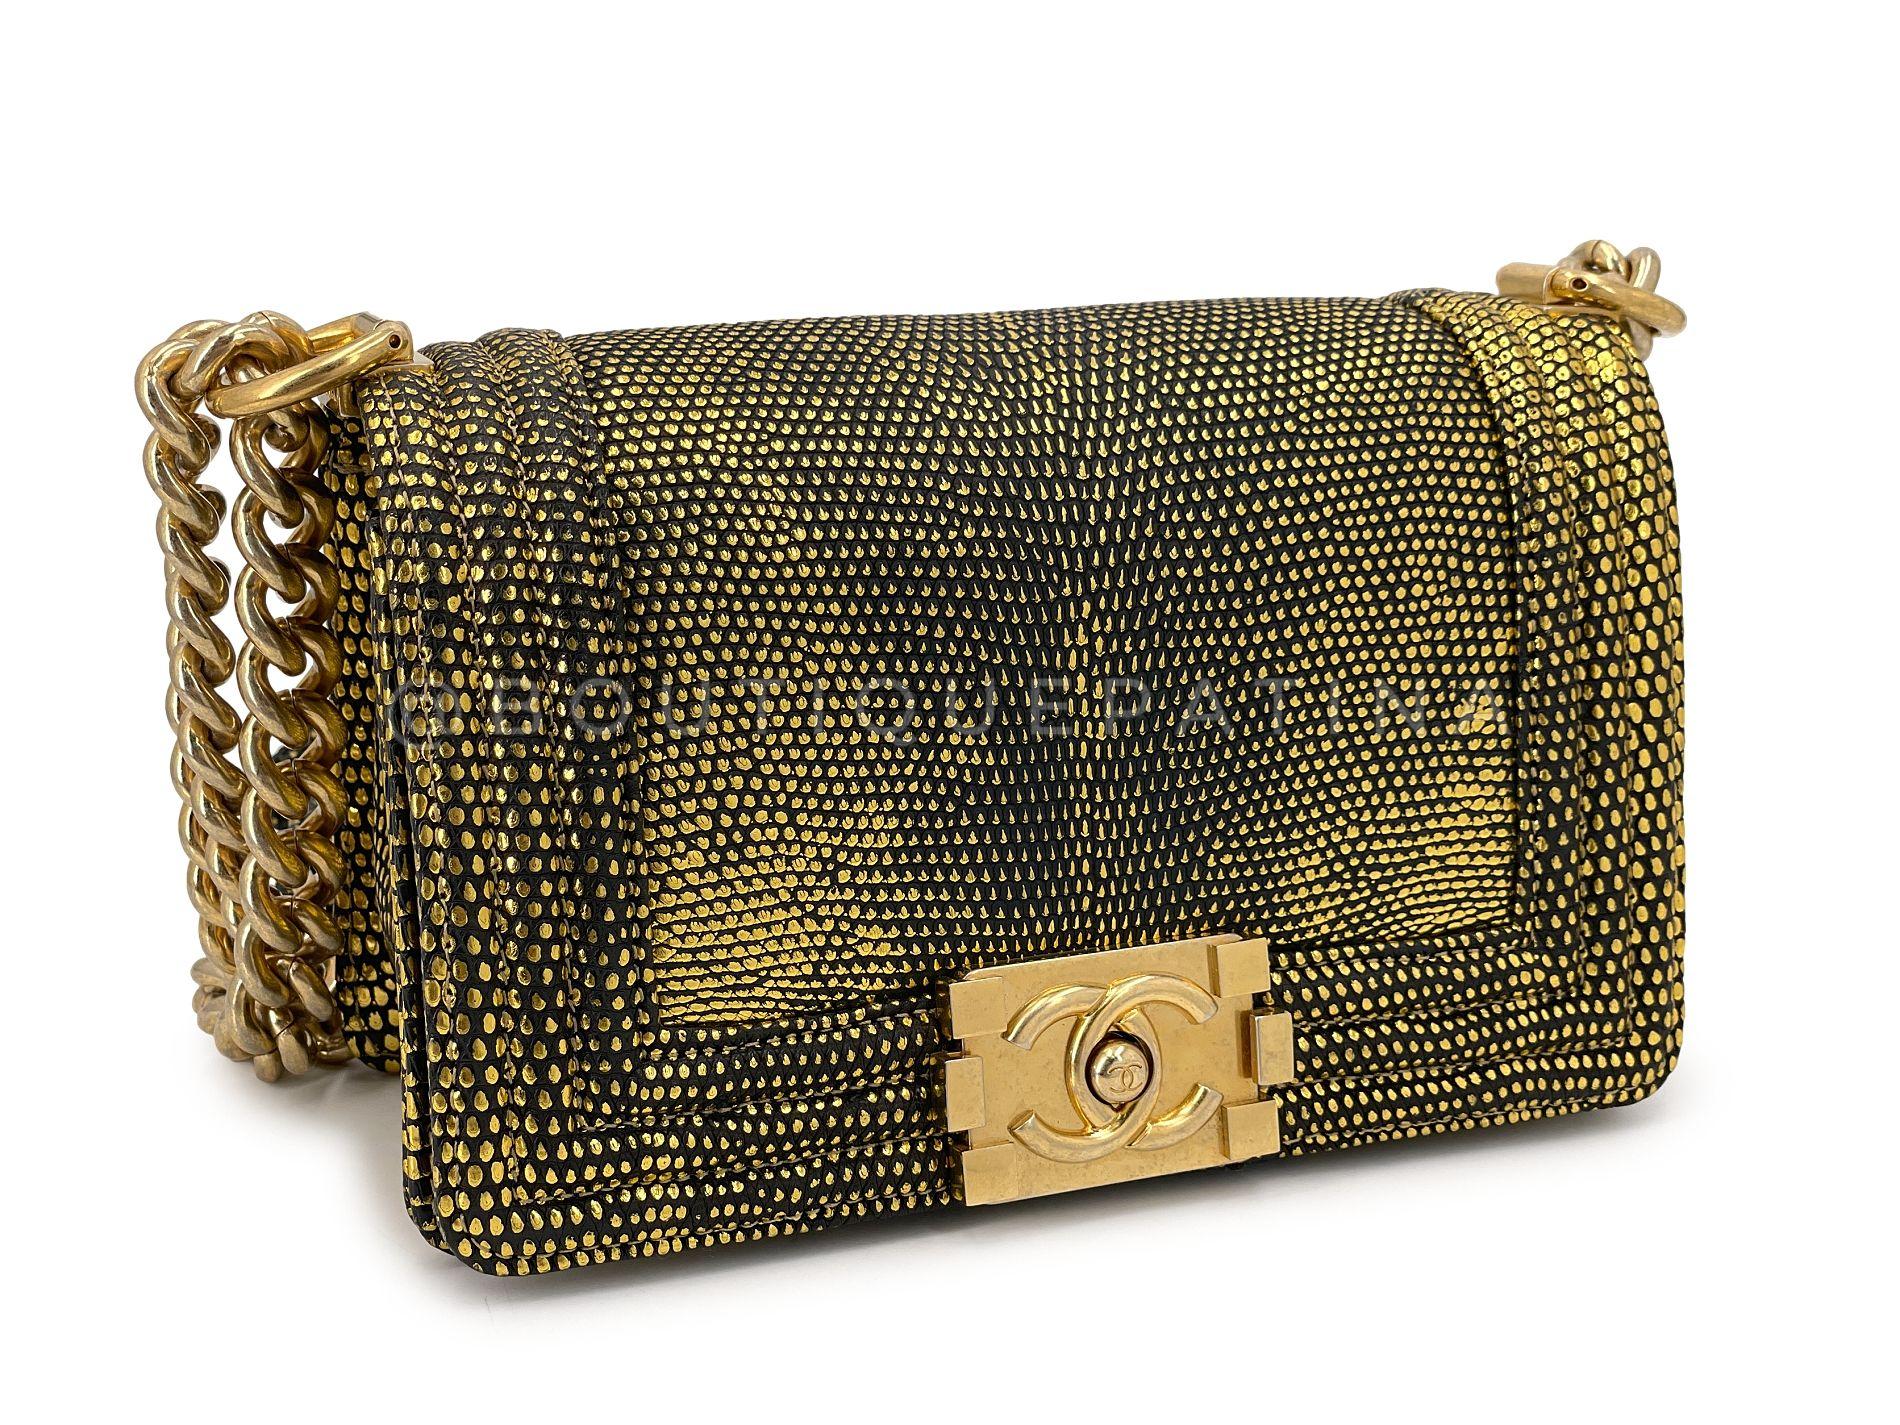 Chanel Gold Lizard Small Boy Flap Bag GHW 67969 In Excellent Condition For Sale In Costa Mesa, CA